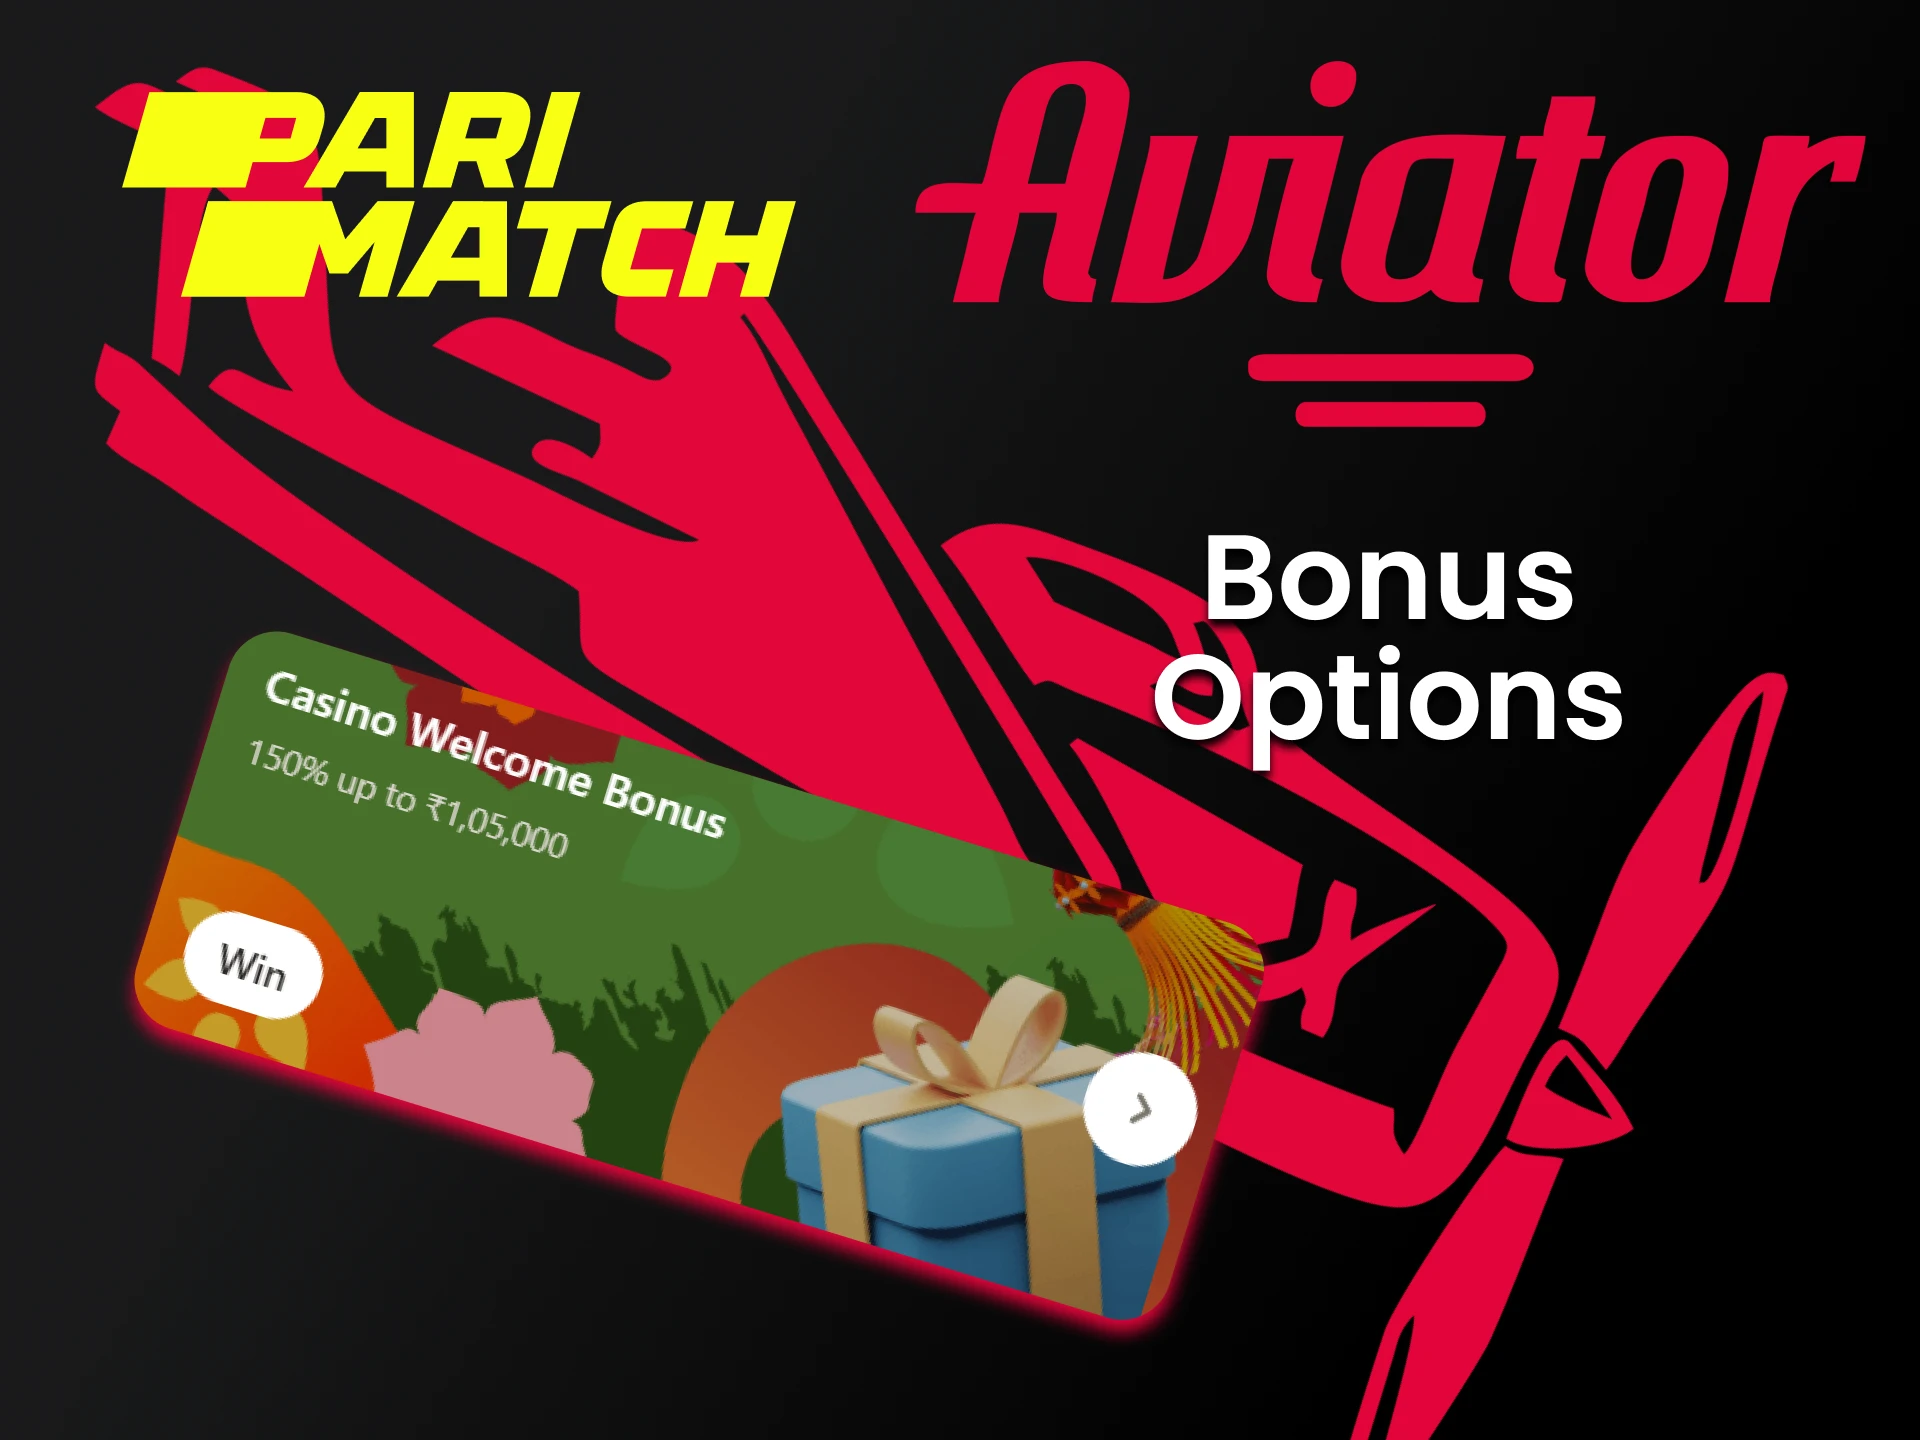 Get a bonus from Parimatch for victories in the game Aviator.